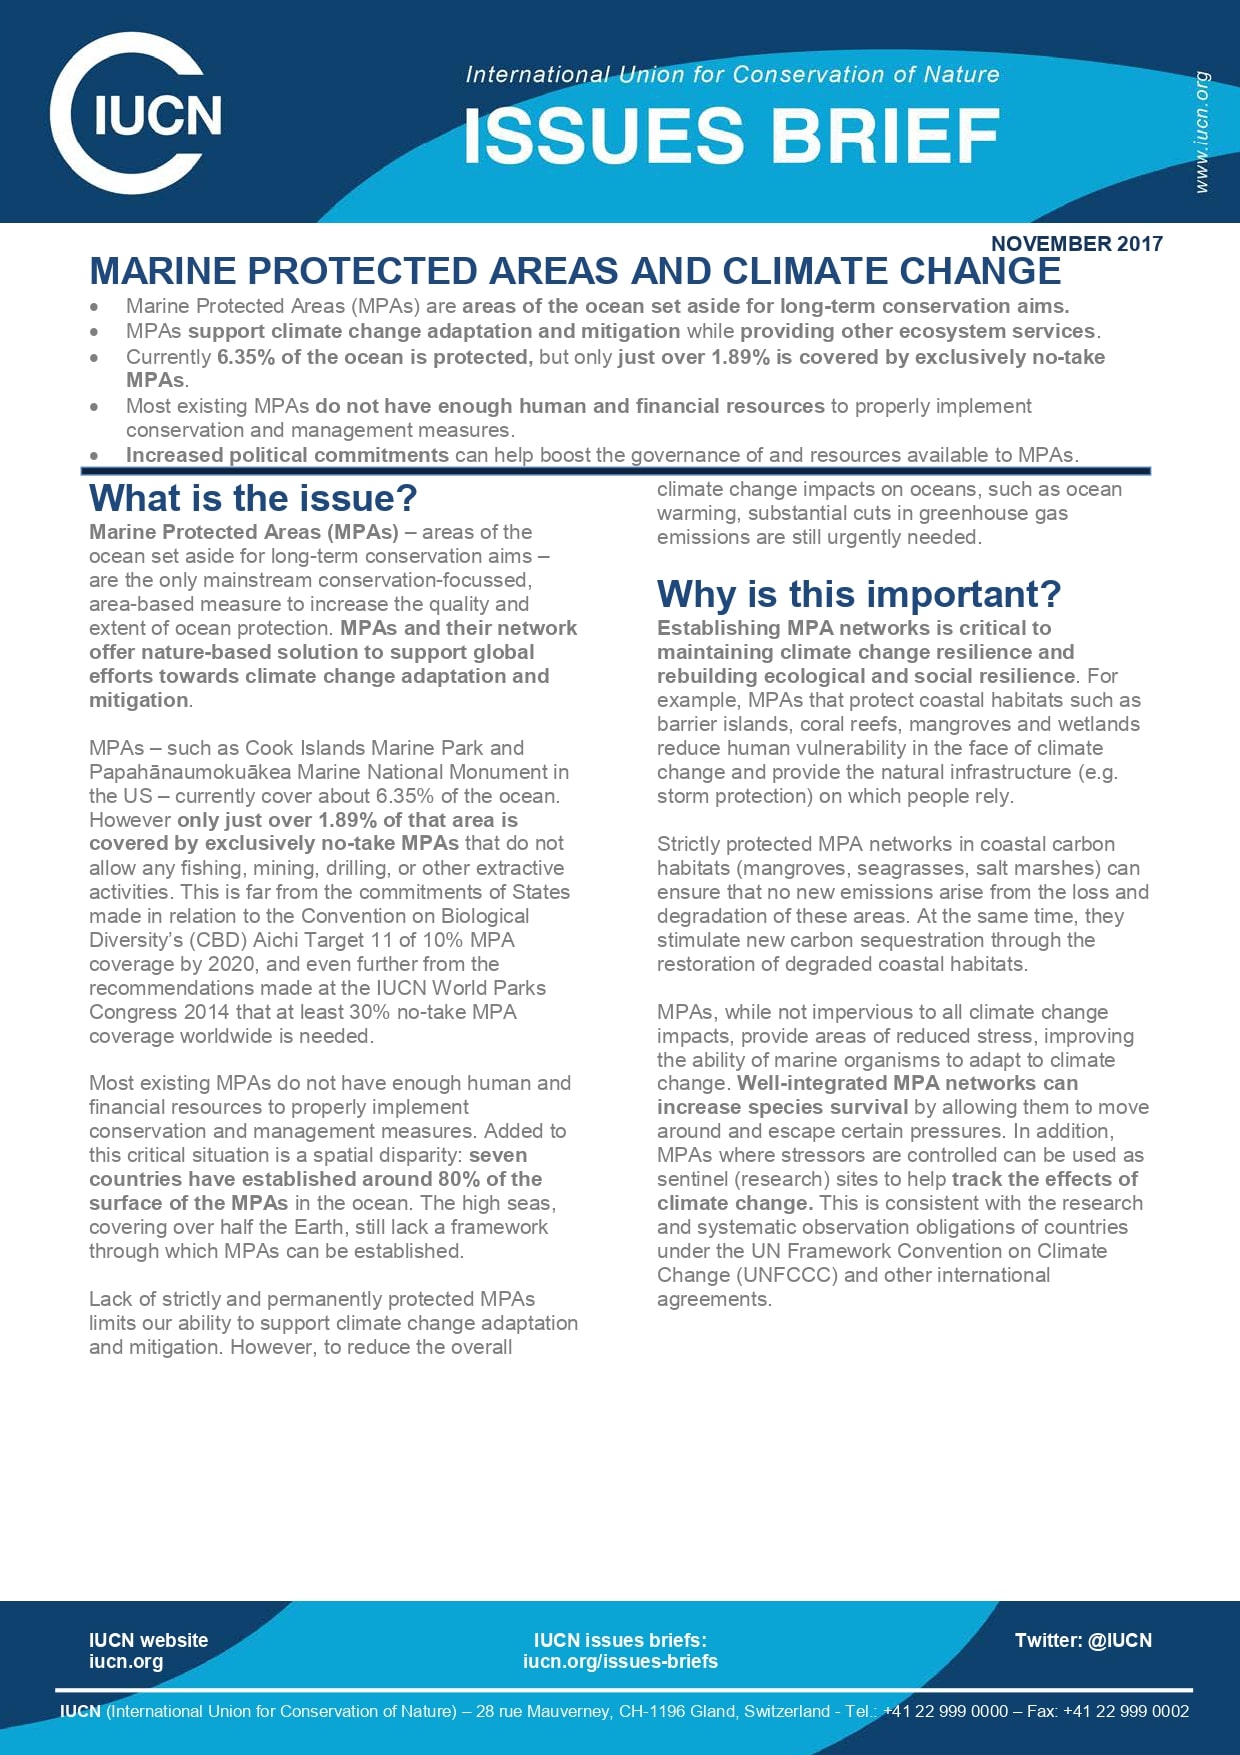 III. Types of Marine Protected Areas